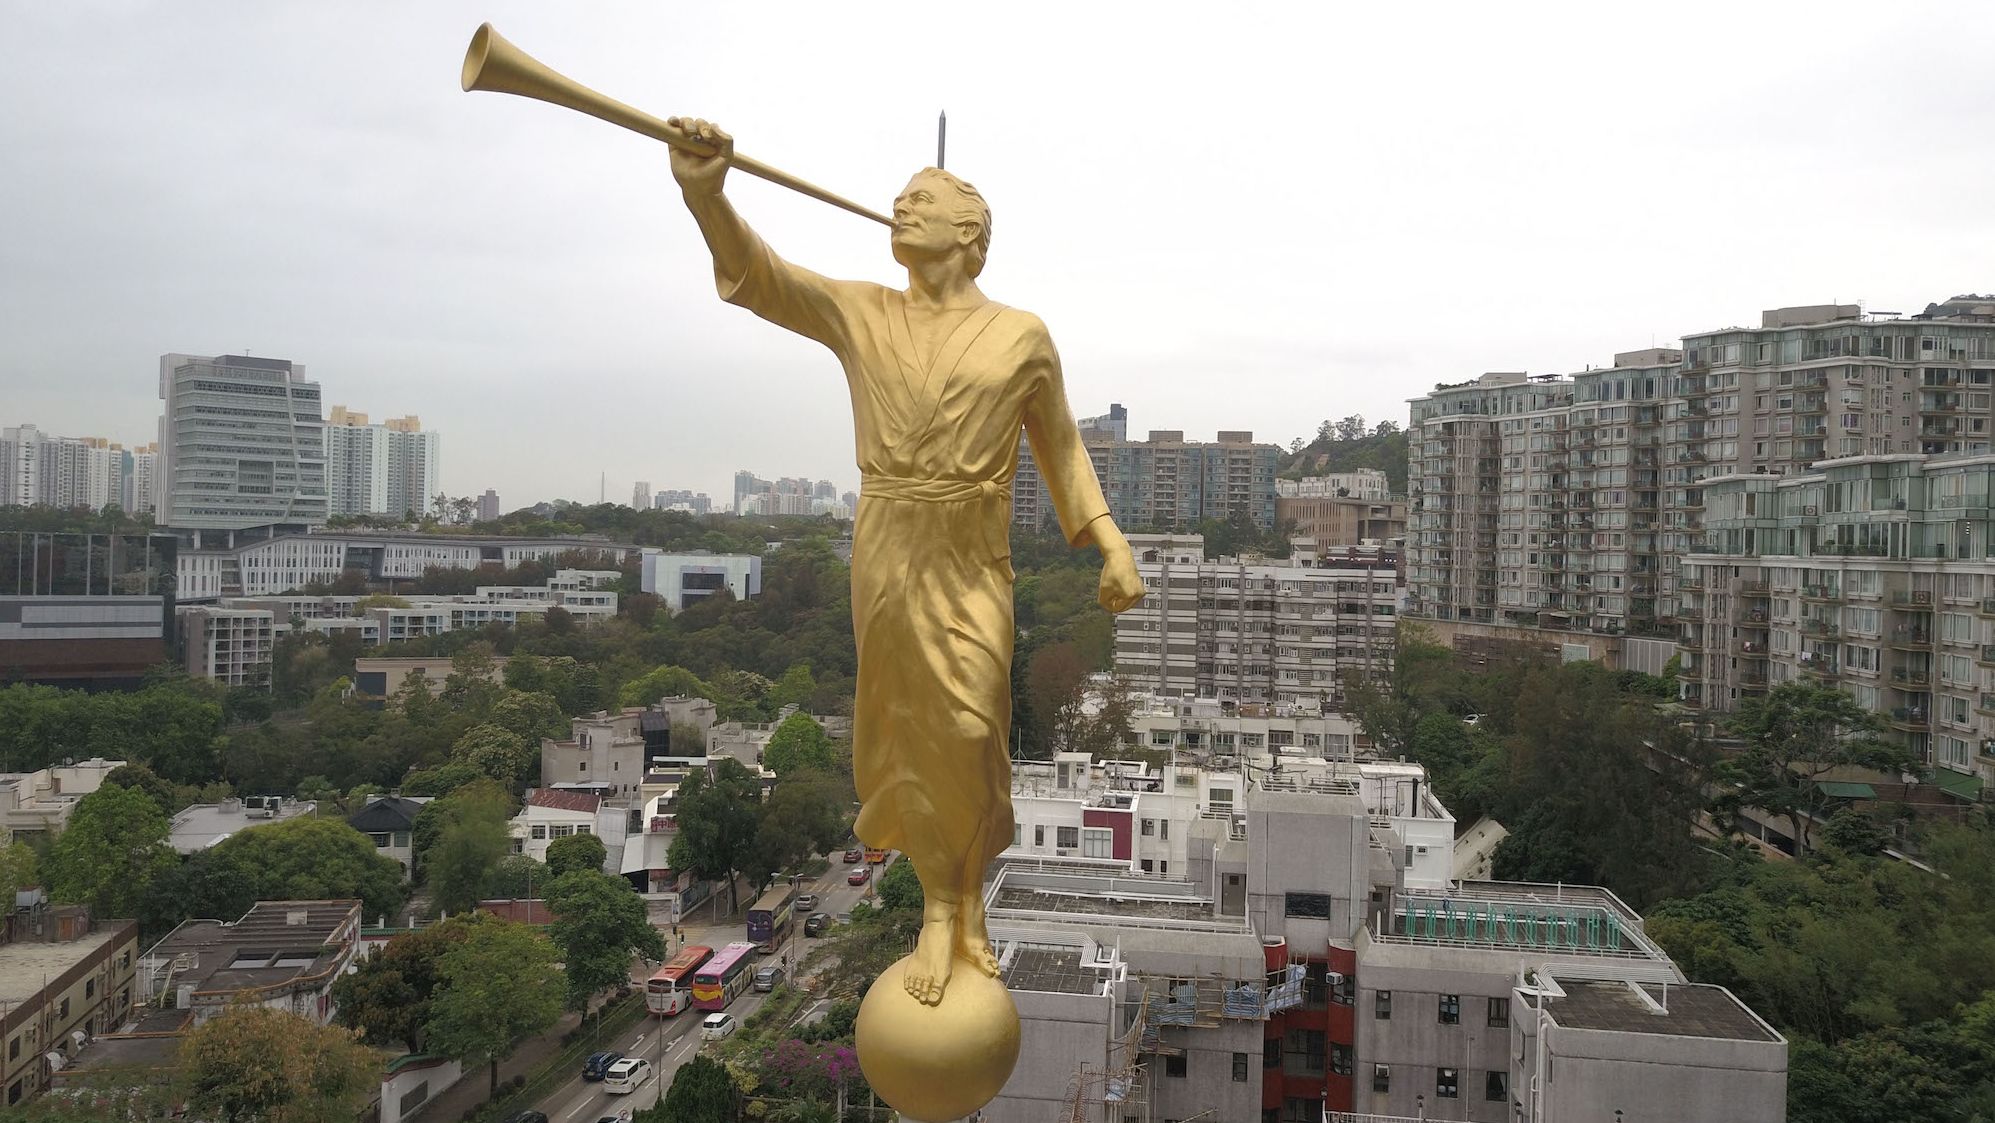 A statue of the angel Moroni, a key character in Mormon theology, seen on top of the Hong Kong Temple of the Church of Jesus Christ of Latter-day Saints in Kowloon, Hong Kong. 